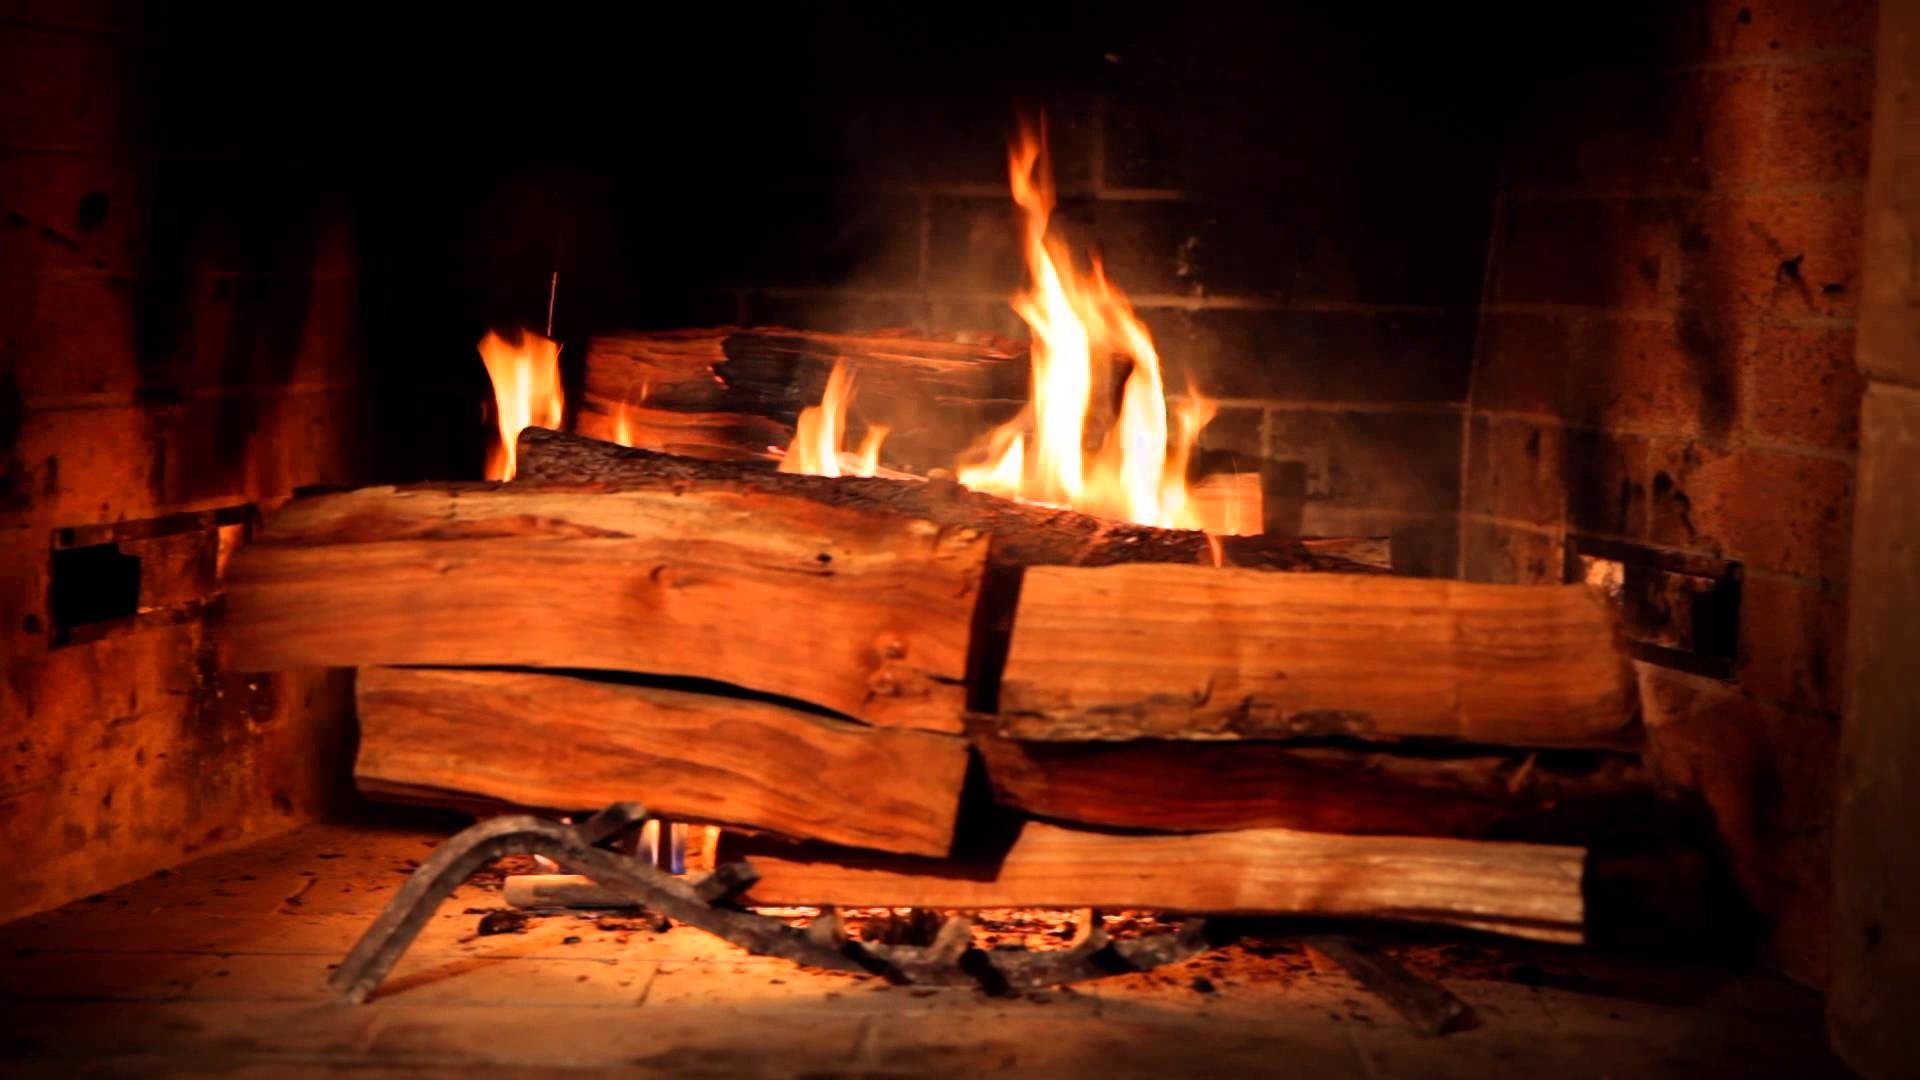 1920x1080 Fireplace for Your Home, Hour-Long Videos of Crackling Fireplaces on Netflix